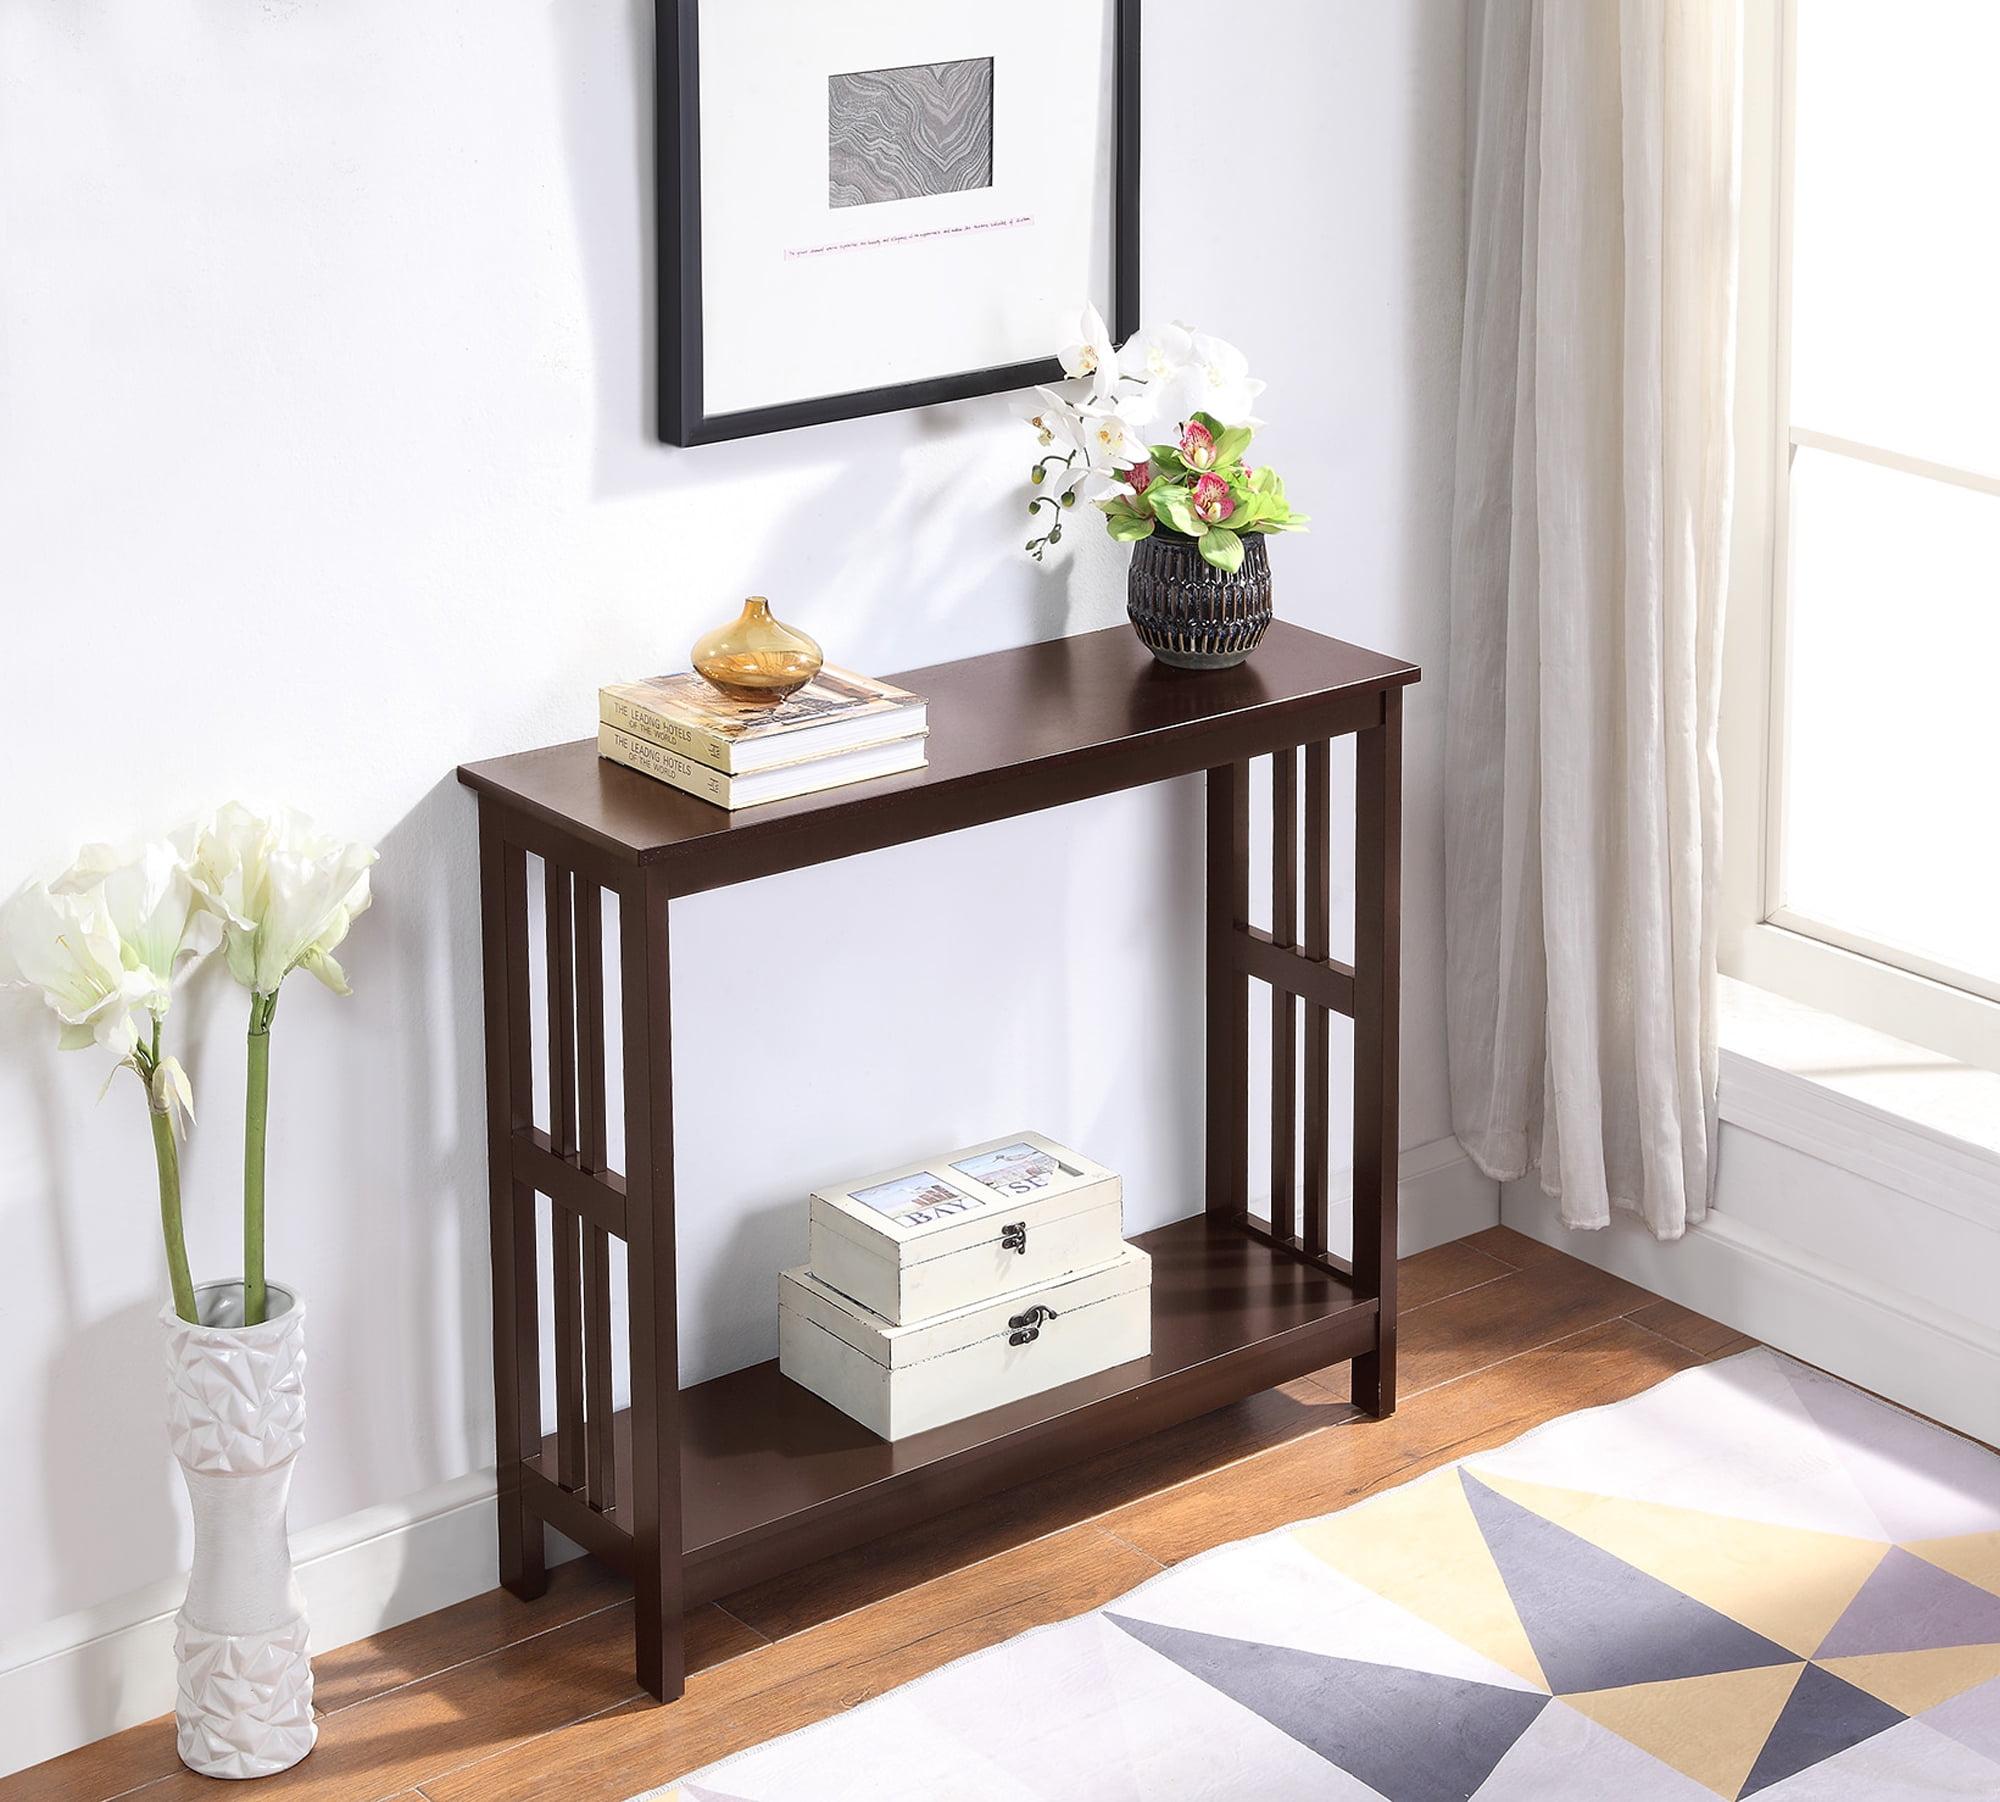 Espresso Mission-Inspired Console Table with Bottom Shelf